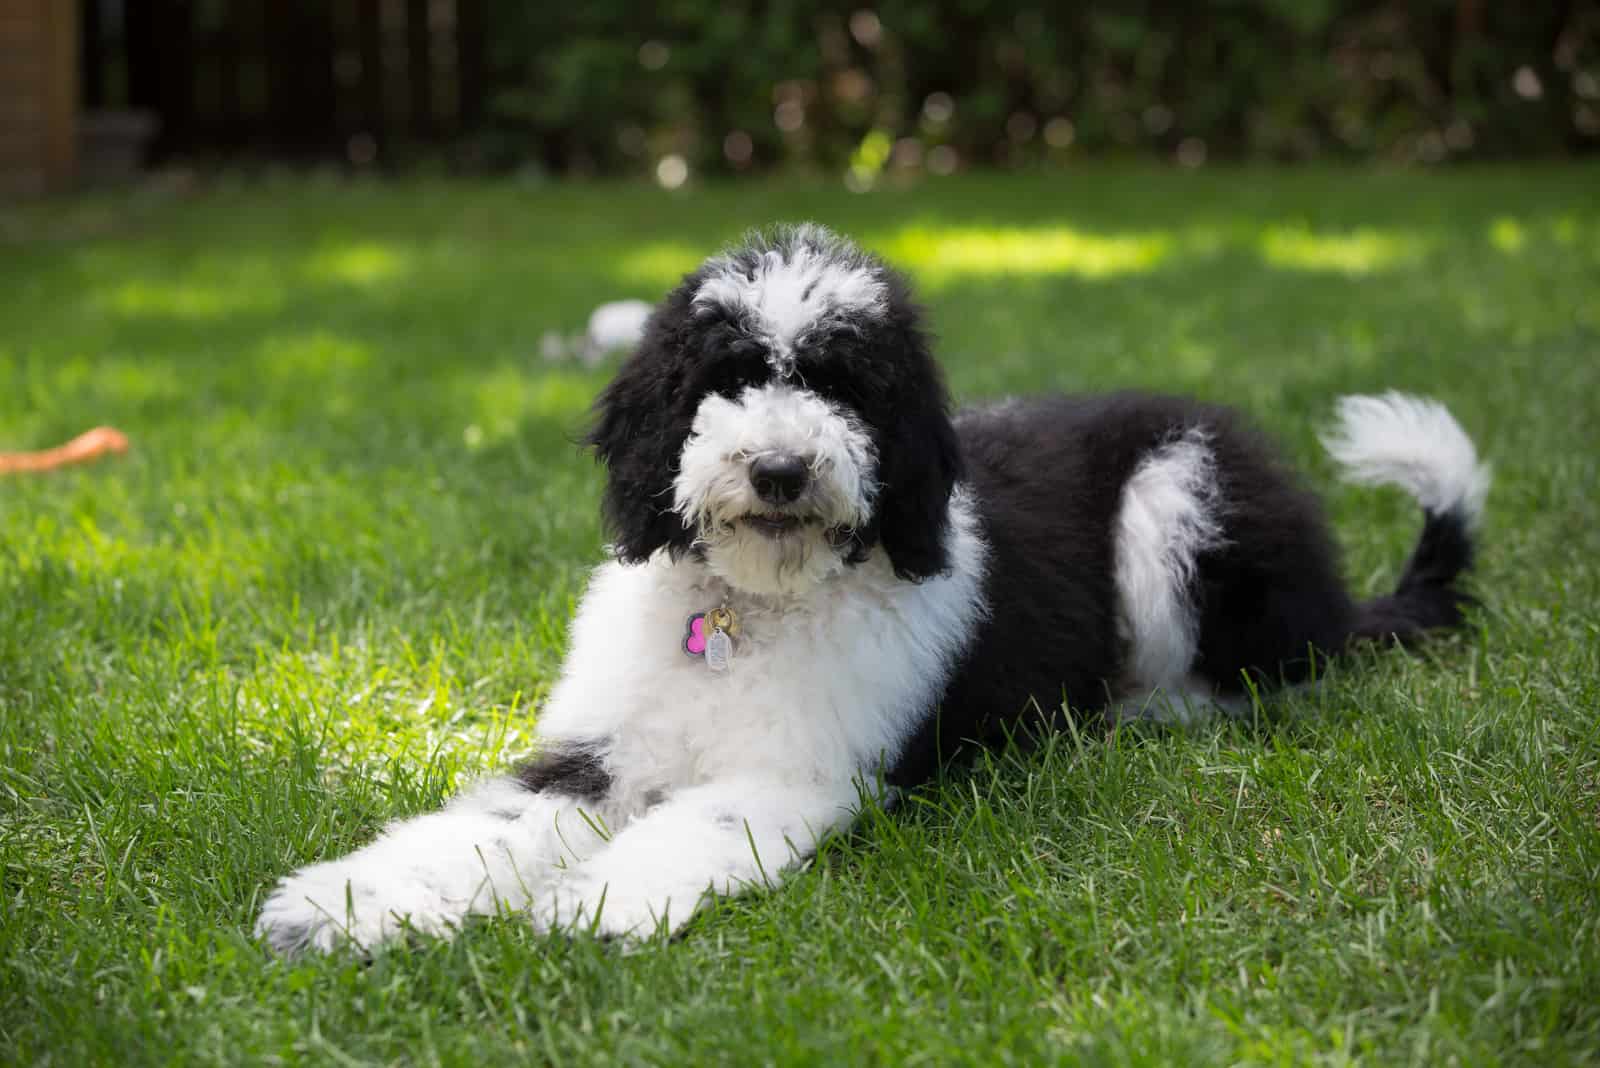 a black and white Sheepadoodle dog lies on the grass